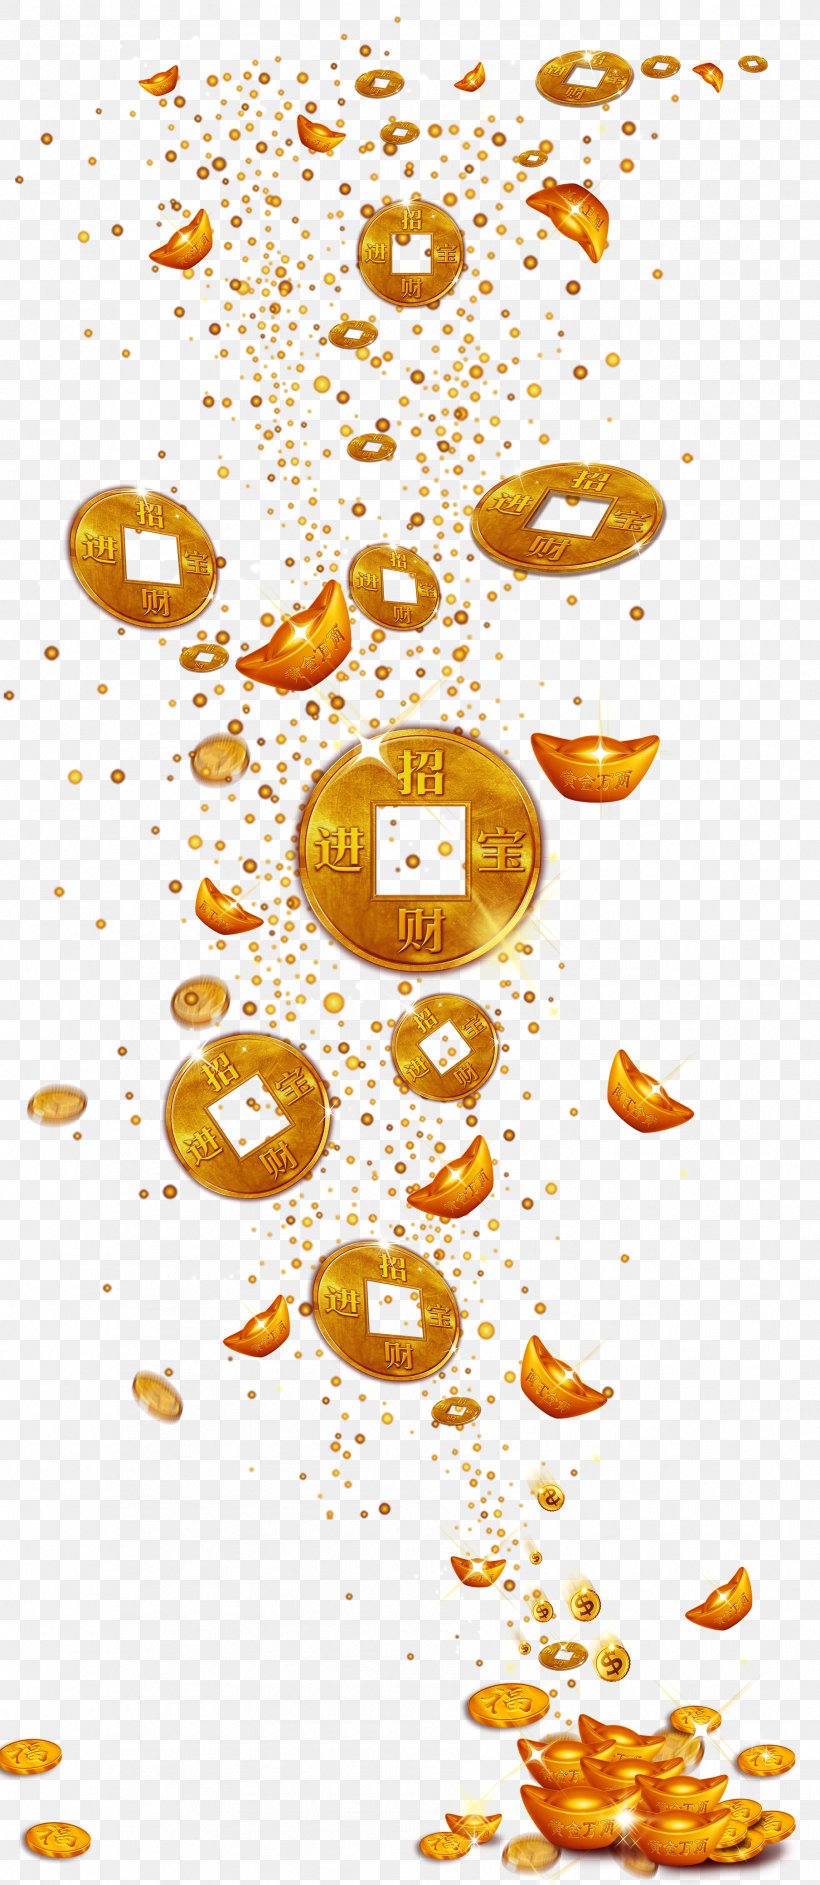 Gold Coin, PNG, 1809x4159px, Gold Coin, Cash, Chinese New Year, Gold, Orange Download Free